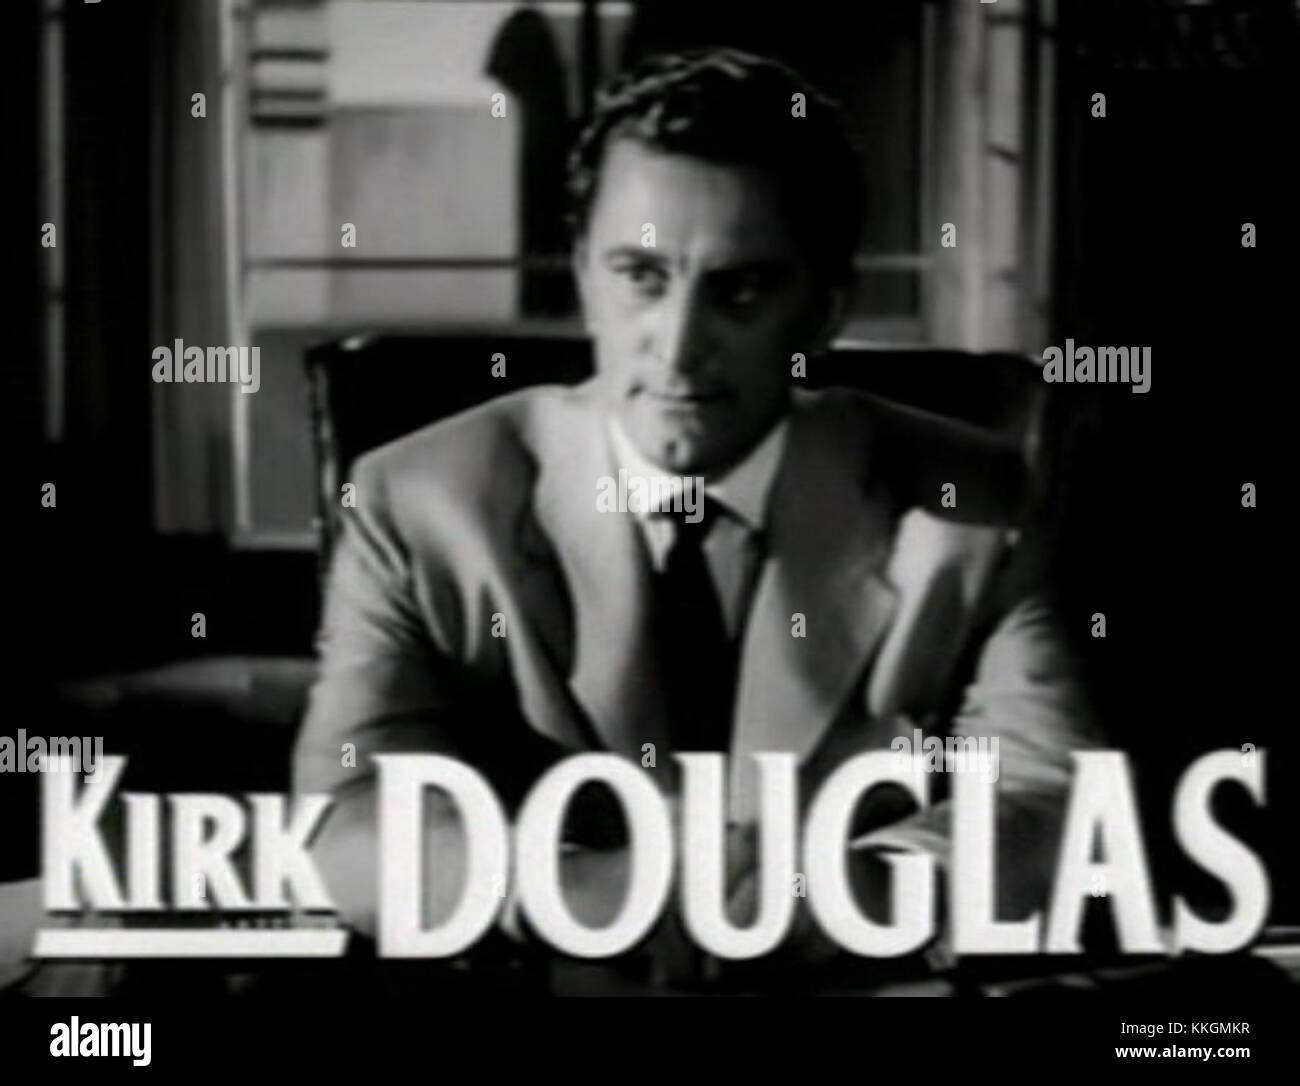 Kirk Douglas in The Bad and the Beautiful trailer Stock Photo